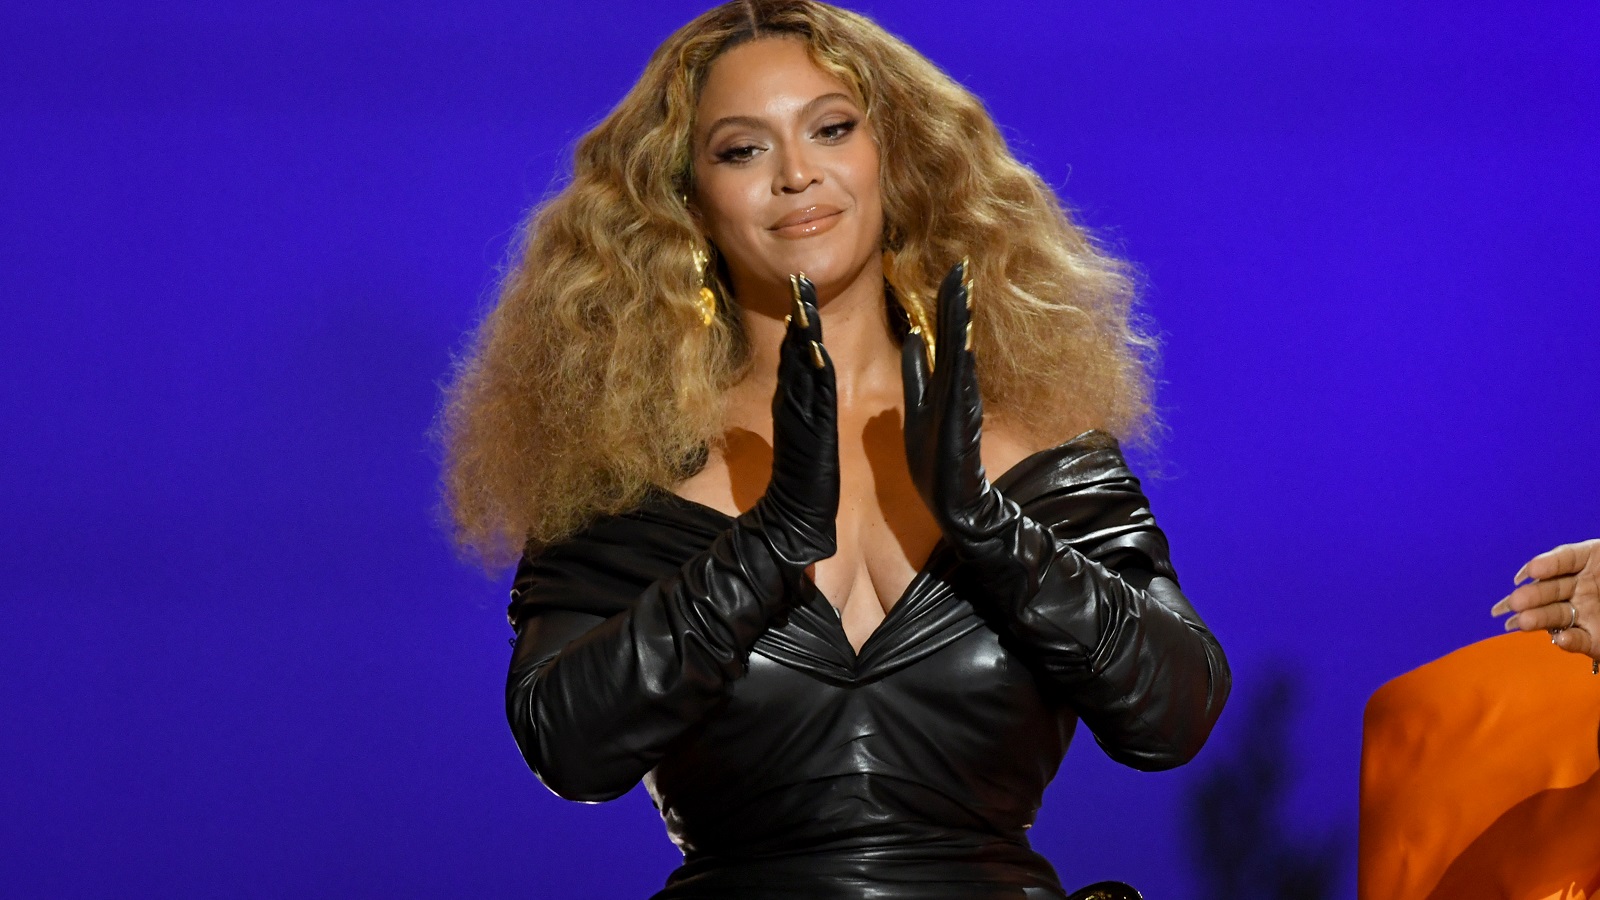 Beyoncé belatedly shares her Halloween costume, but it’s one she can be proud of